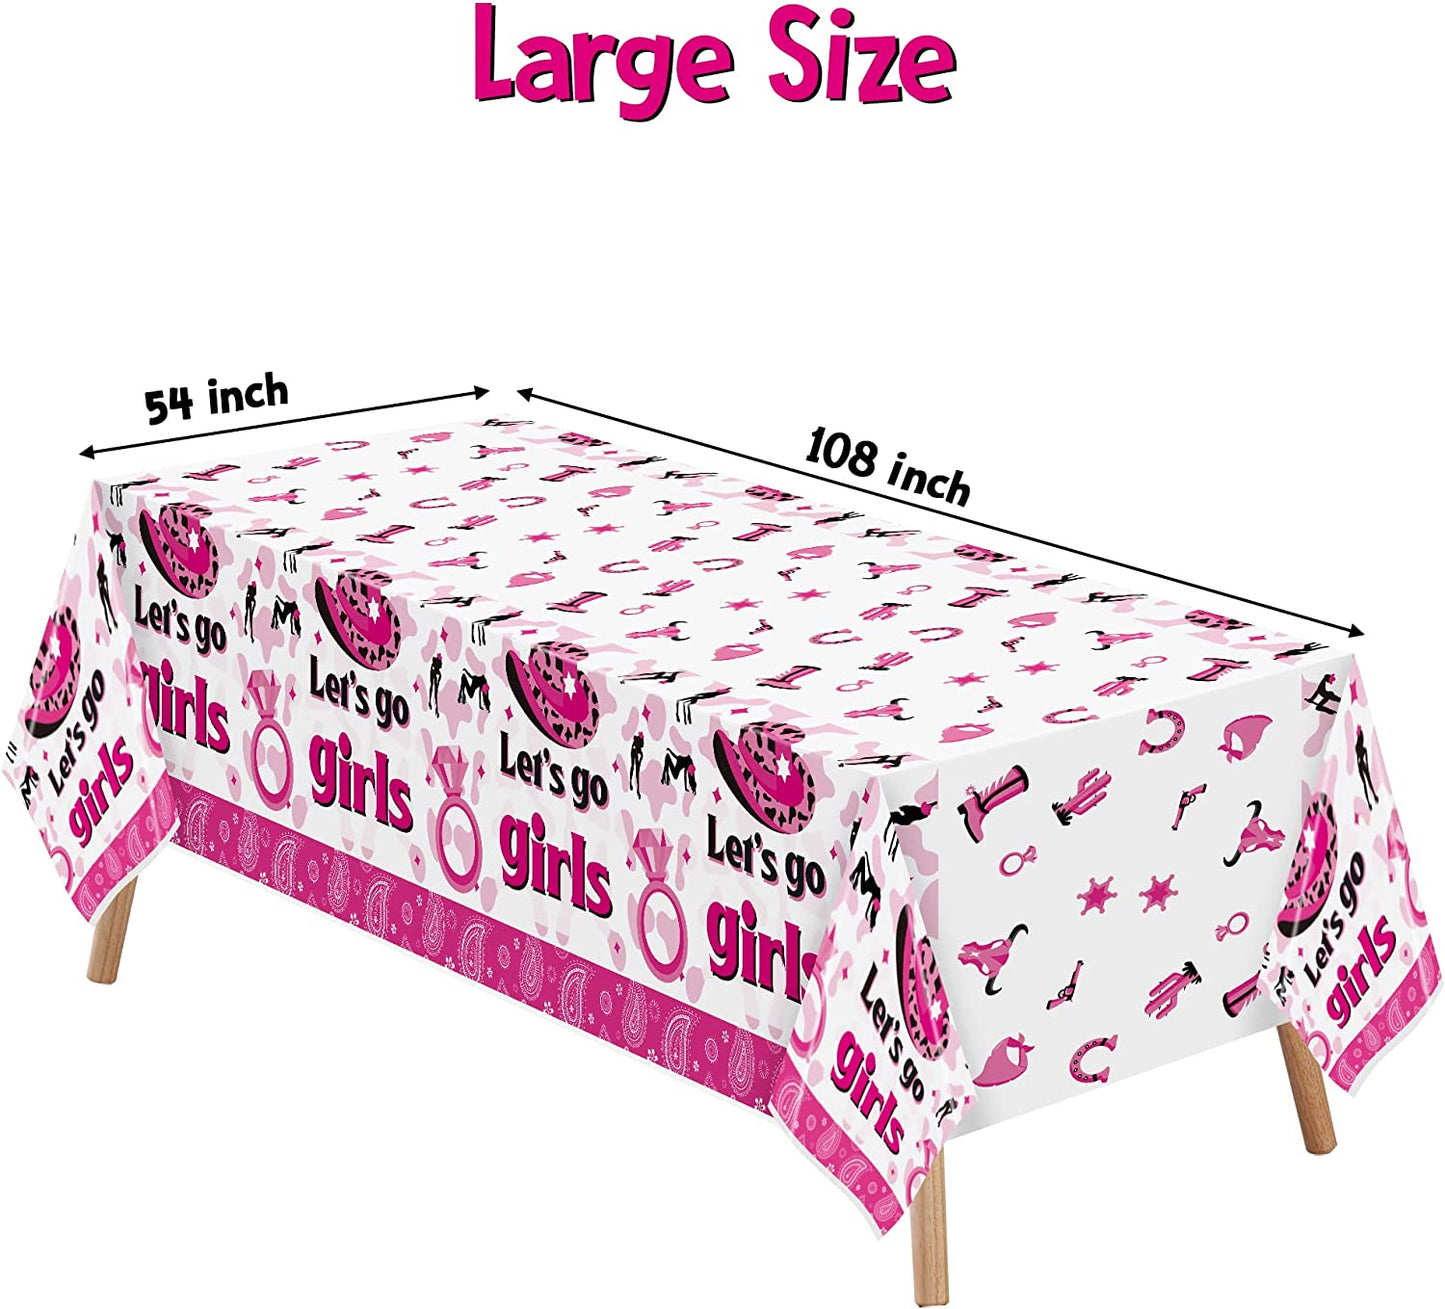 BkeeCten 3 Pack Western Cowgirl Theme Party Tablecover Disposable Let's Go Girls Plastic Tablecloth Pink Horse Tablecloth for Cowgirl Cowboy West Birthday Party Baby Shower Decorations 54x108 Inch